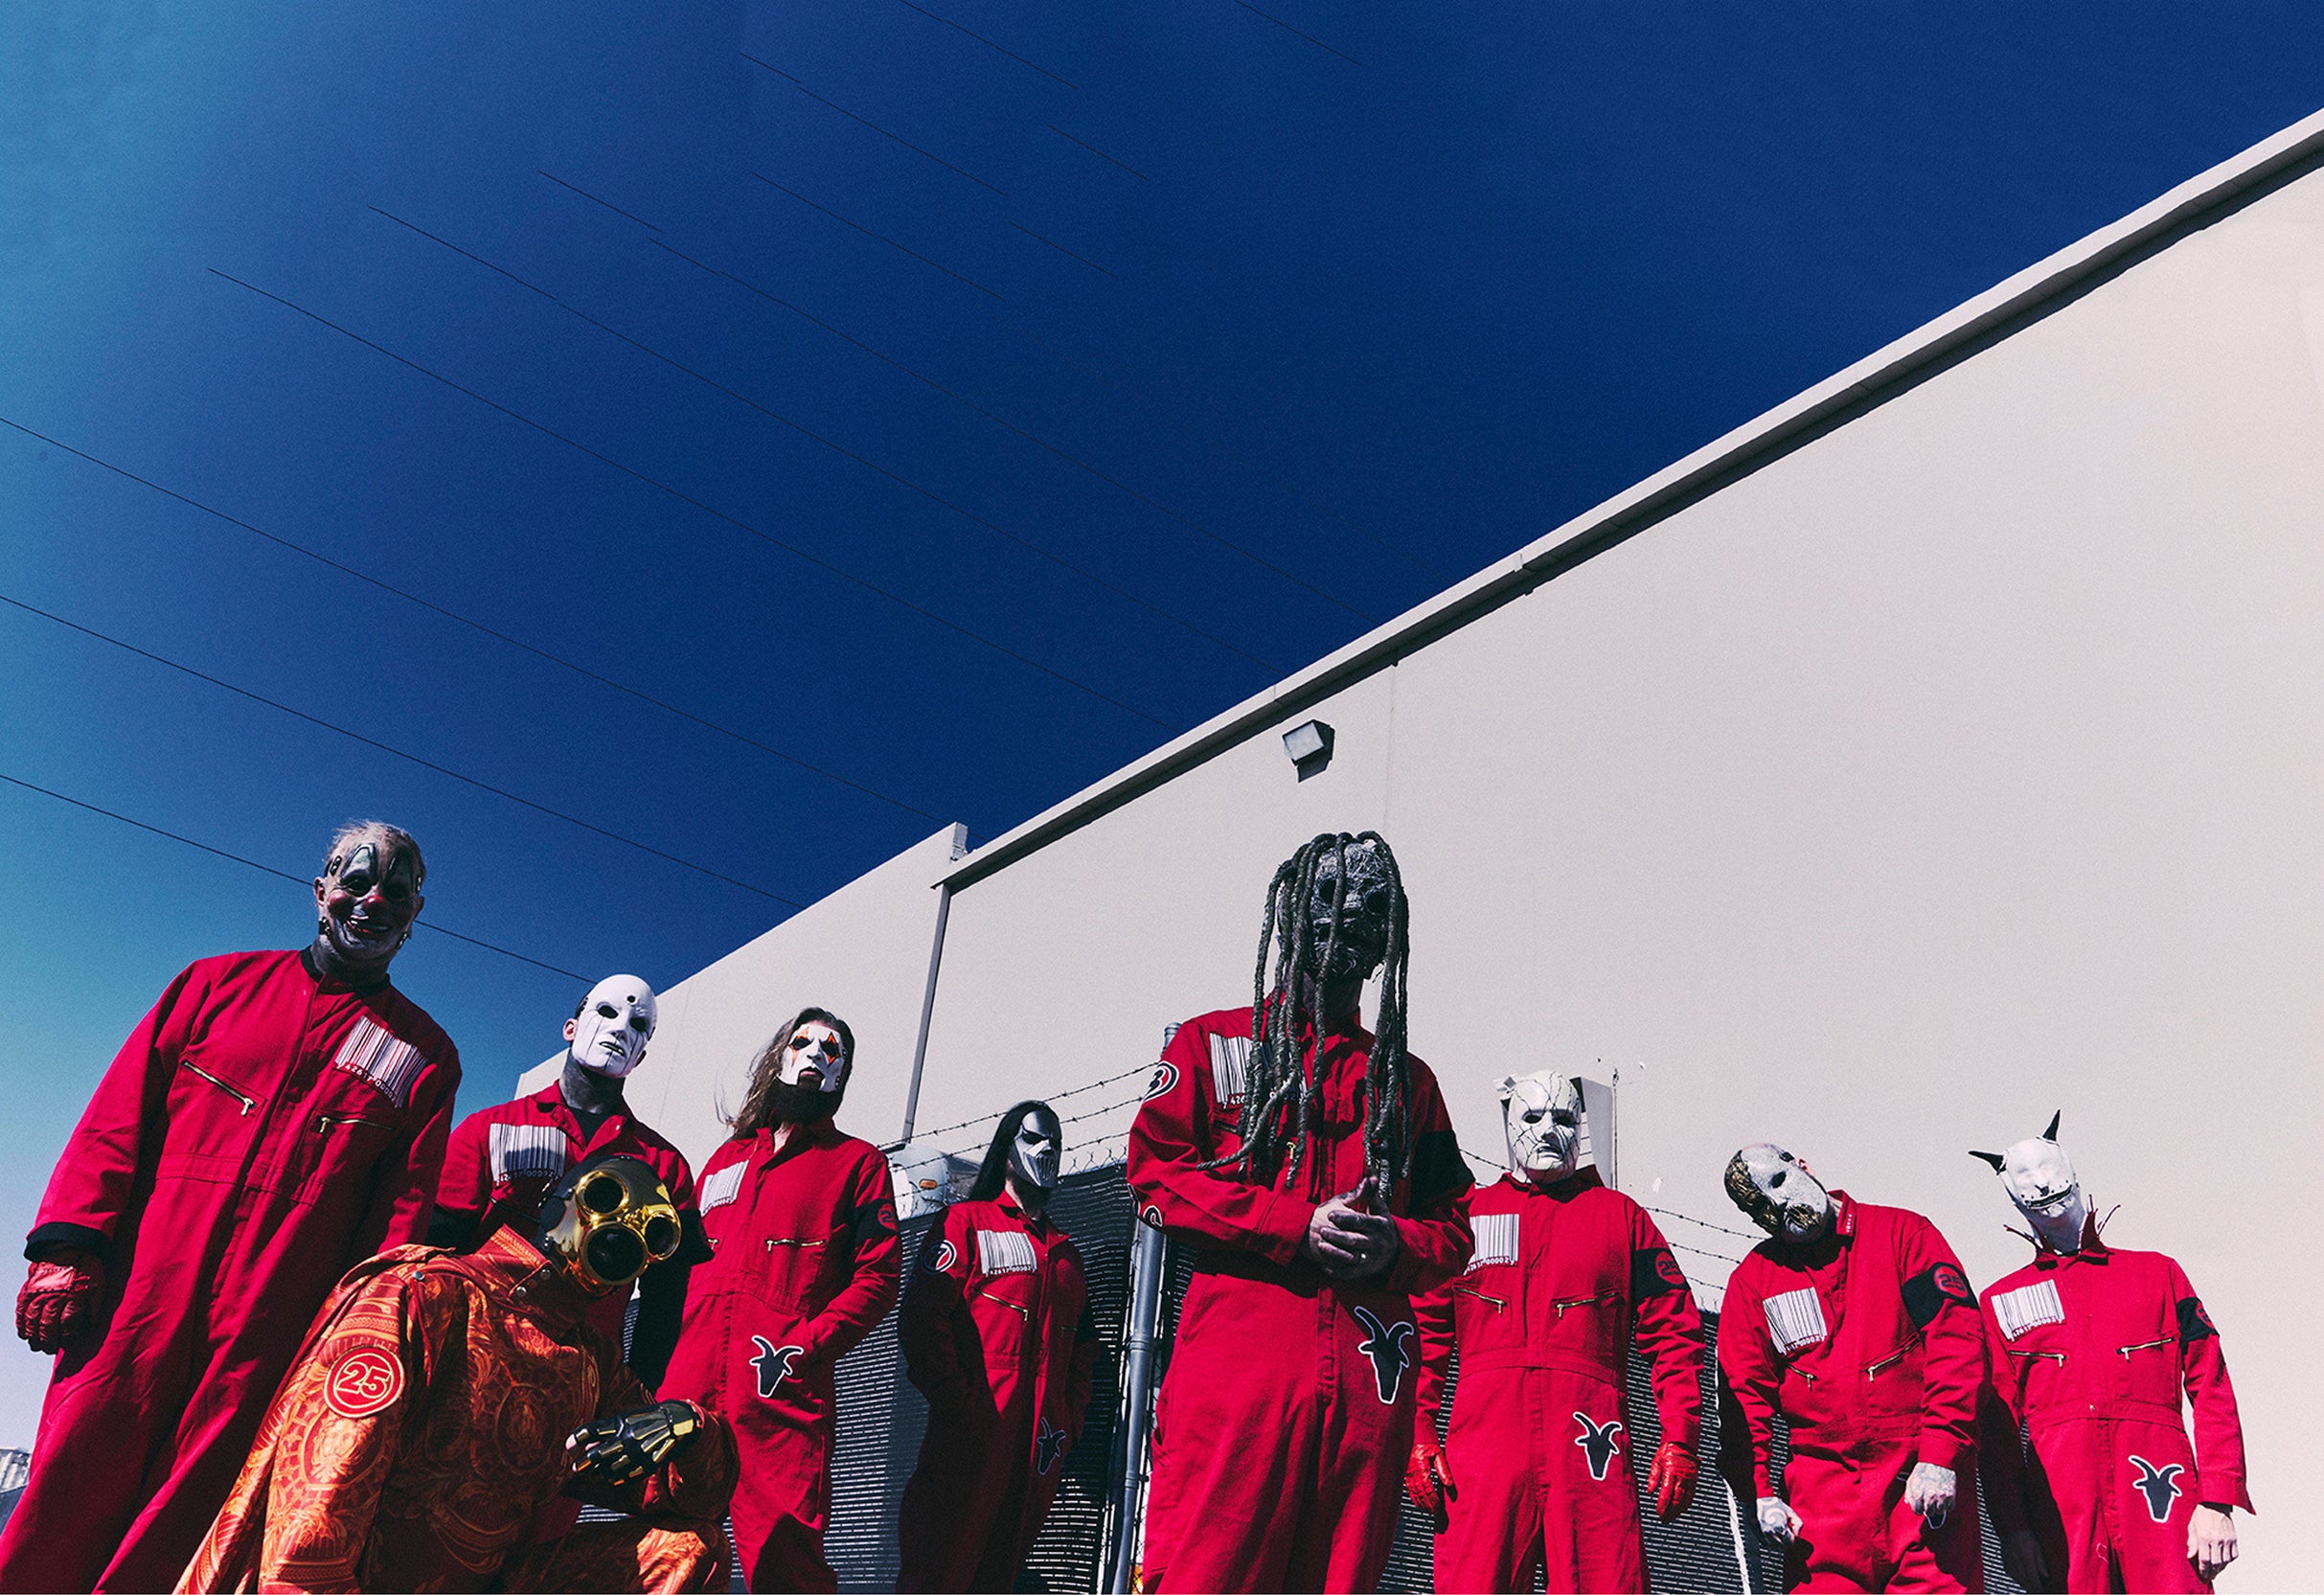 Slipknot: "Here Comes The Pain" 25th Anniversary Tour in Burgettstown promo photo for Knotfest Artist presale offer code